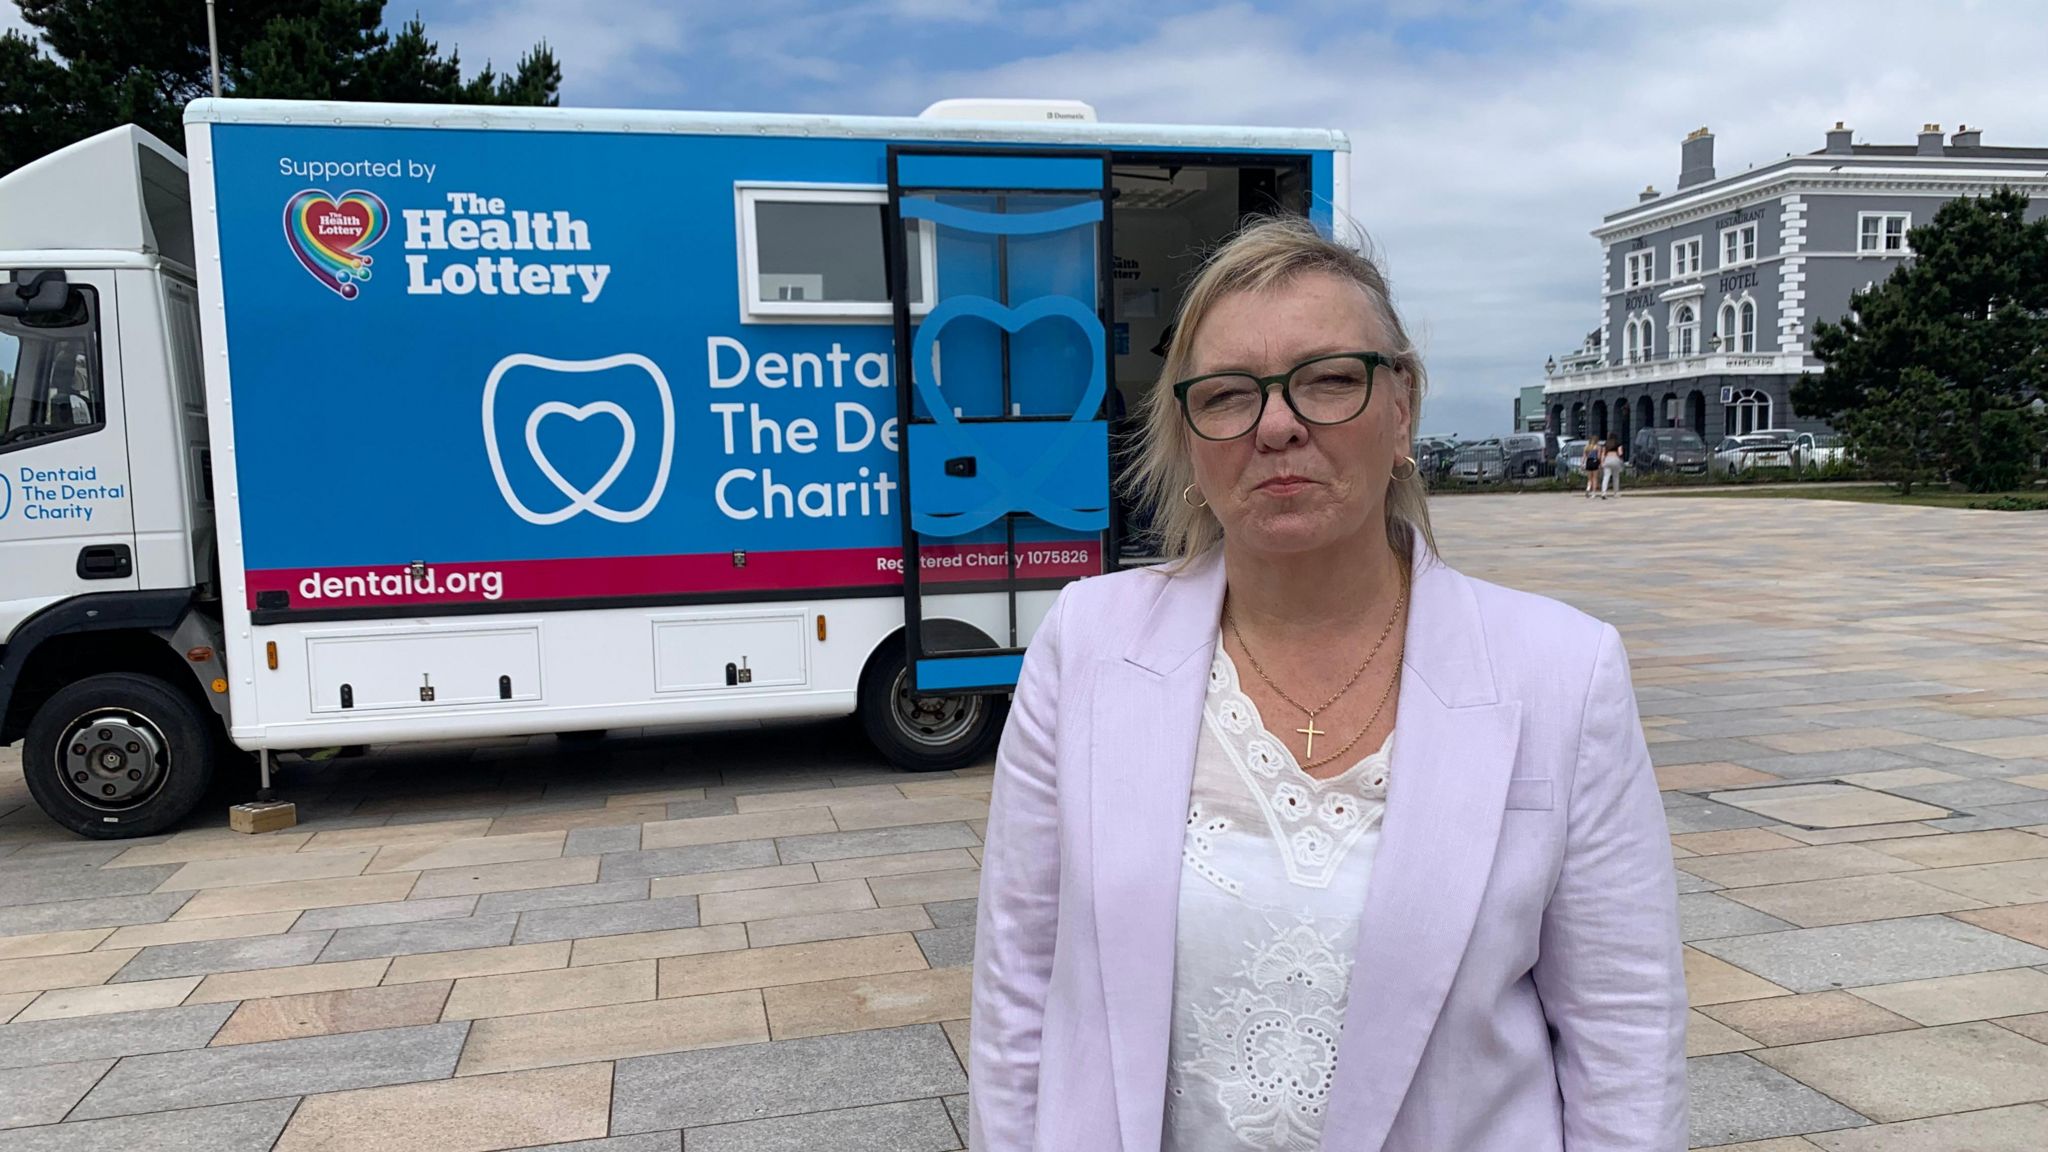 Jill Flanagan standing in front of mobile dentist unit